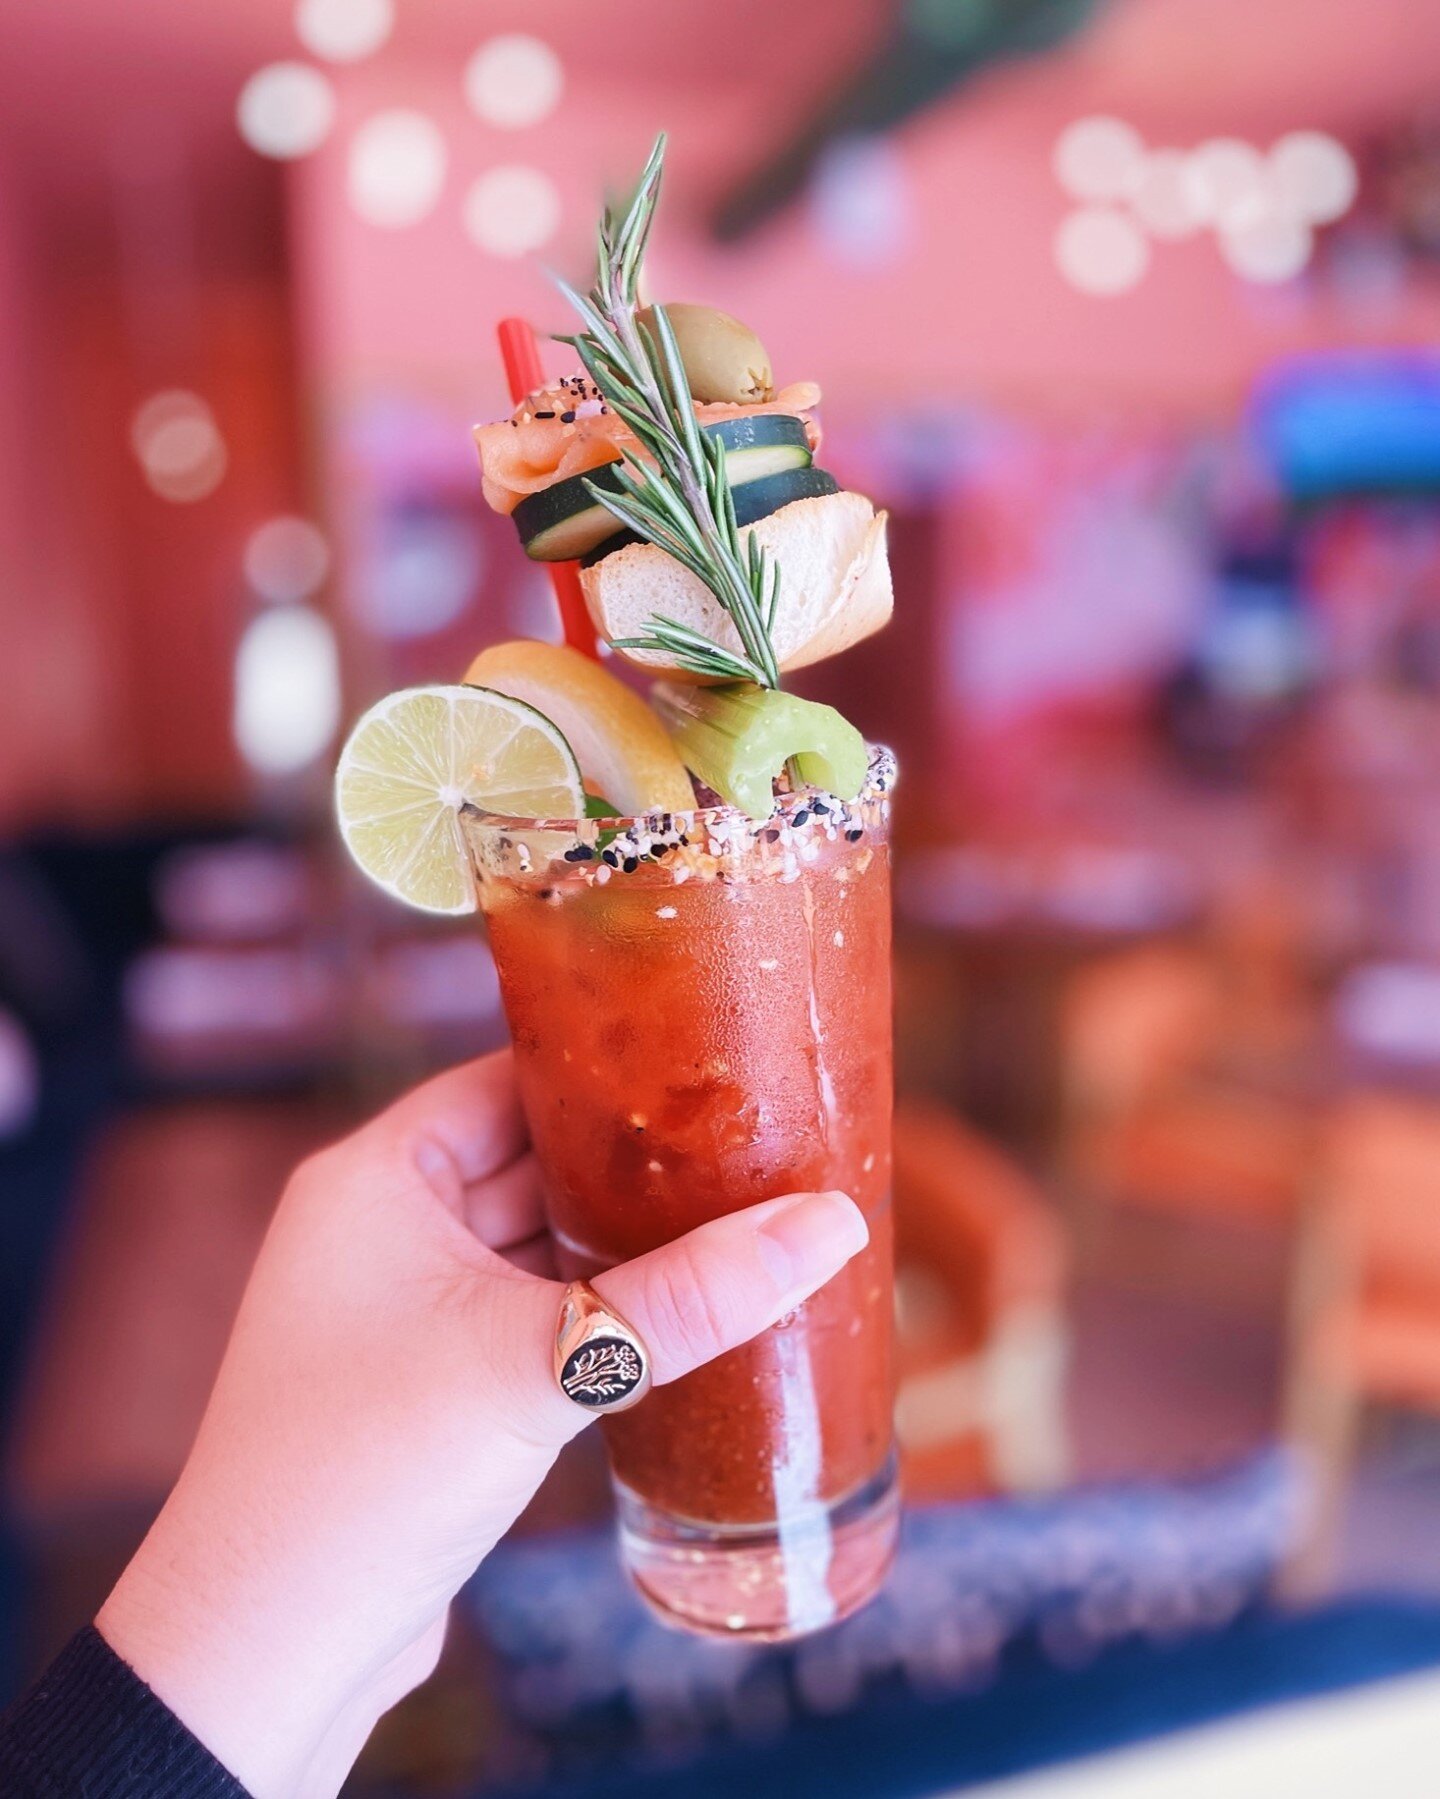 See you tomorrow bellissima 😉⁠
⁠
We are open to the public tomorrow starting at 8AM and we CANT WAIT TO CHEERS WITH YOU 💖⁠
⁠
#BreakfastAndBubbles #TasteTheStars #BuongiornoPrincipessa #BloodyMary